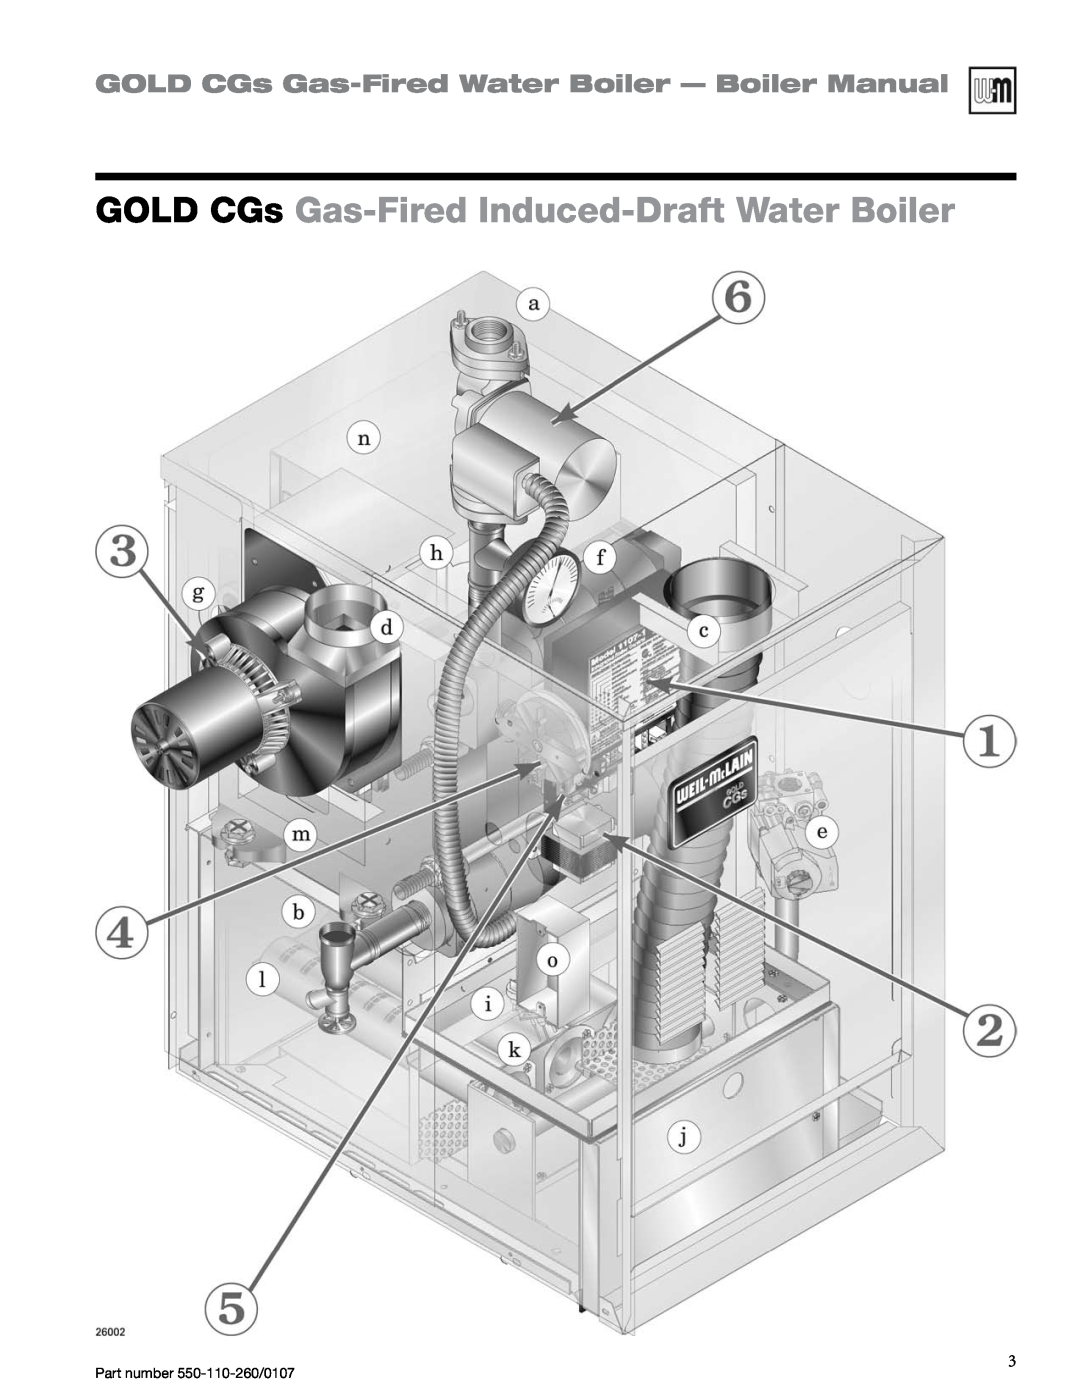 Weil-McLain 550-110-260/0107 GOLD CGs Gas-Fired Induced-DraftWater Boiler, GOLD CGs Gas-FiredWater Boiler — Boiler Manual 